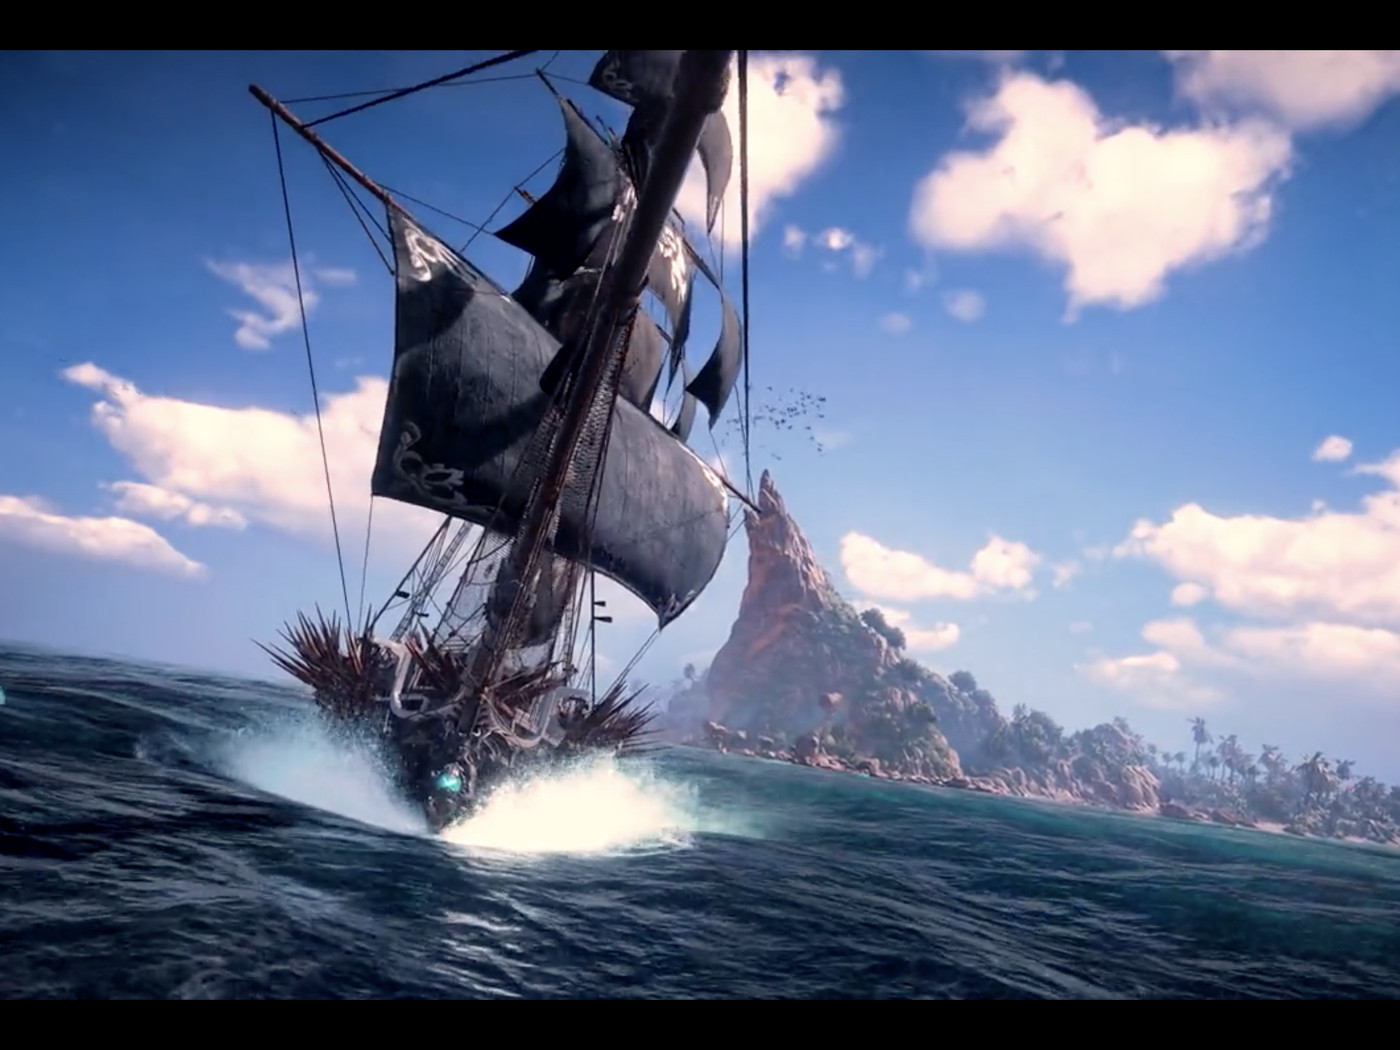 Ubisoft confirms leaked Skull and Bones gameplay video is real